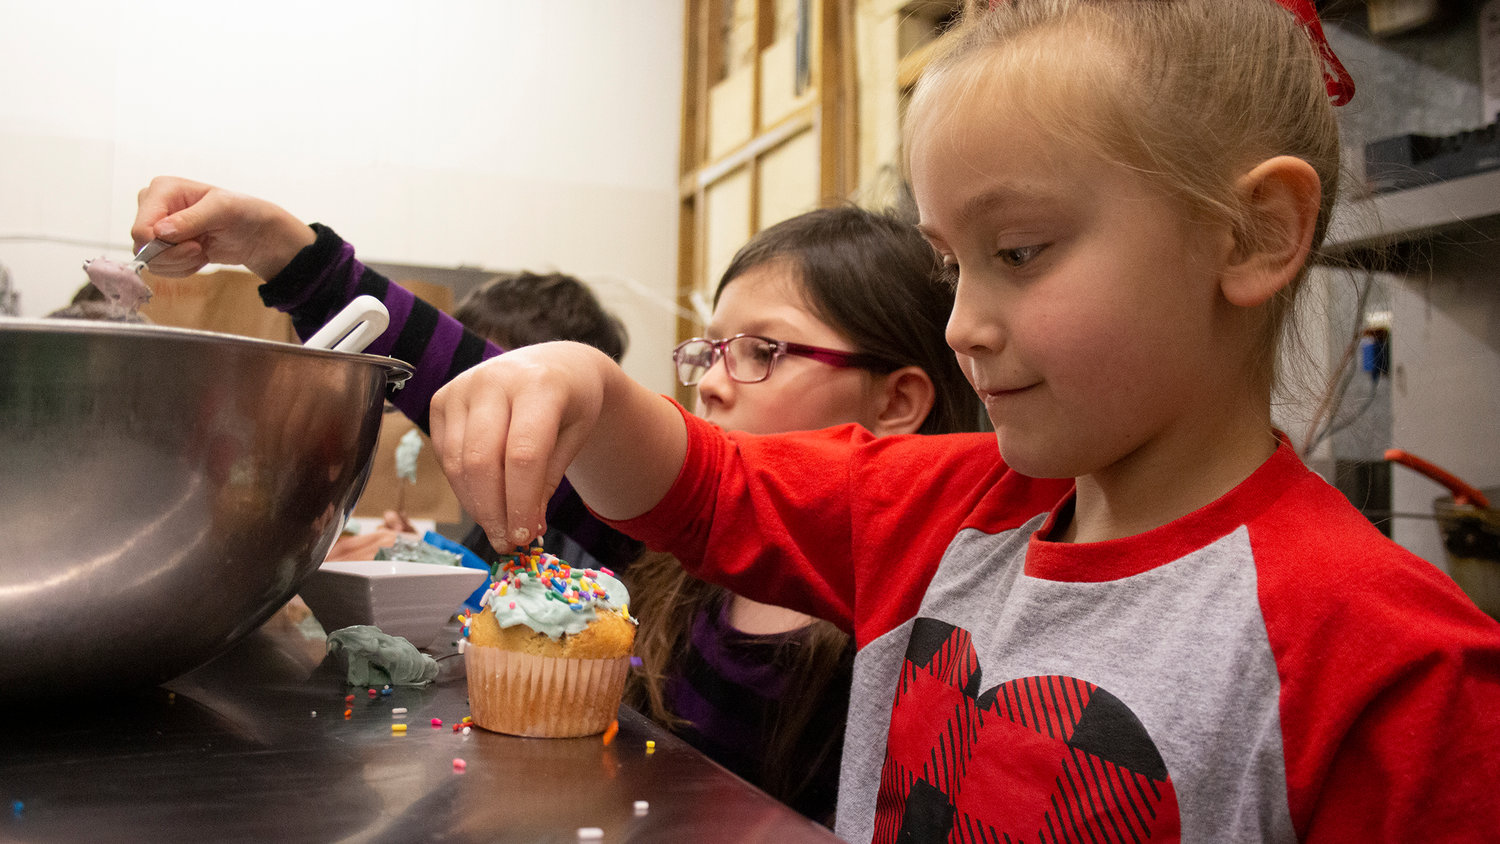 During a cooking class last Saturday, Feb. 1, young bakers added frosting and sprinkles to their cupcakes.